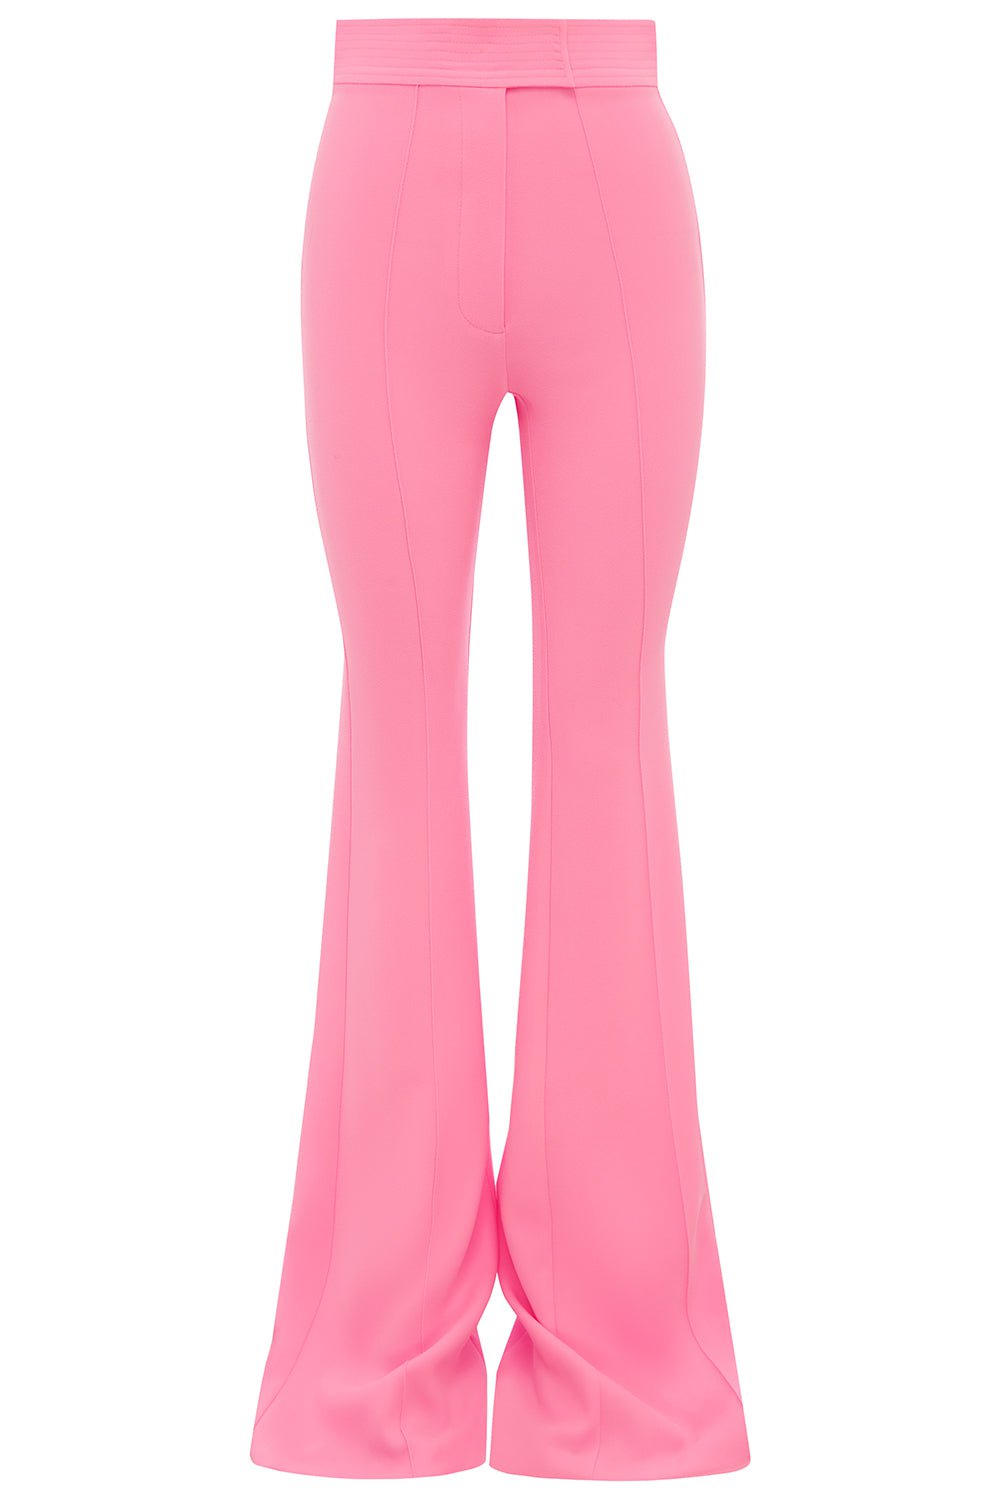 ALEX PERRY-Marden Pant - Pink-